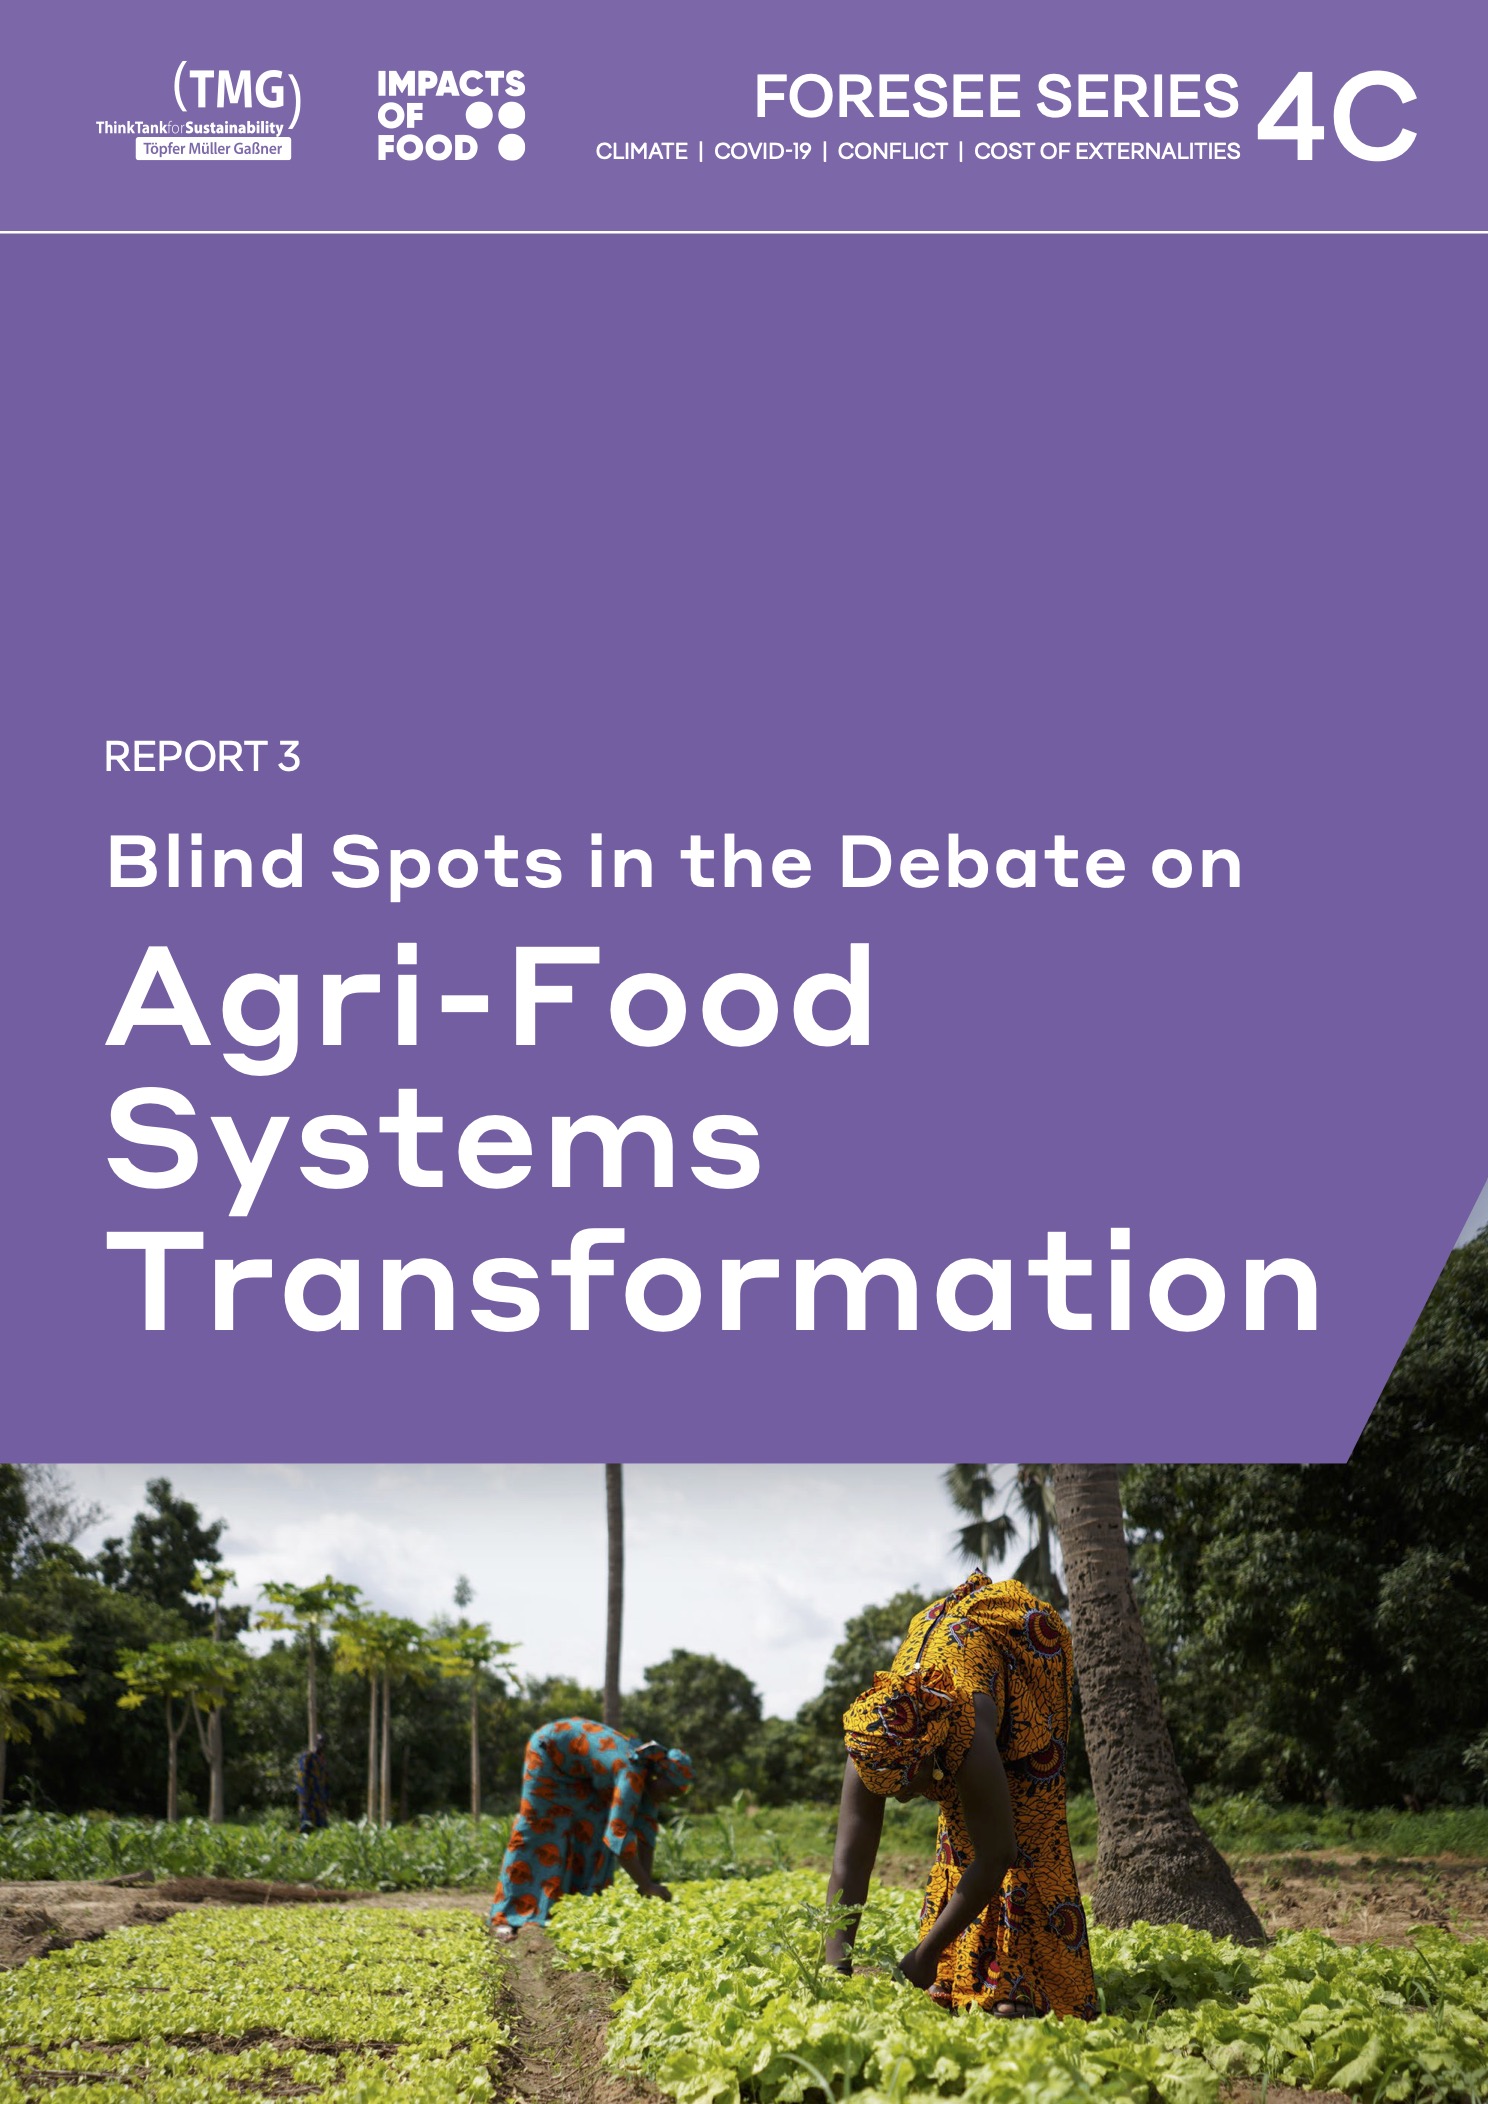 FORESEE (4C) Report 3: Blindspots in the Debate on Agri-Food System Transformation